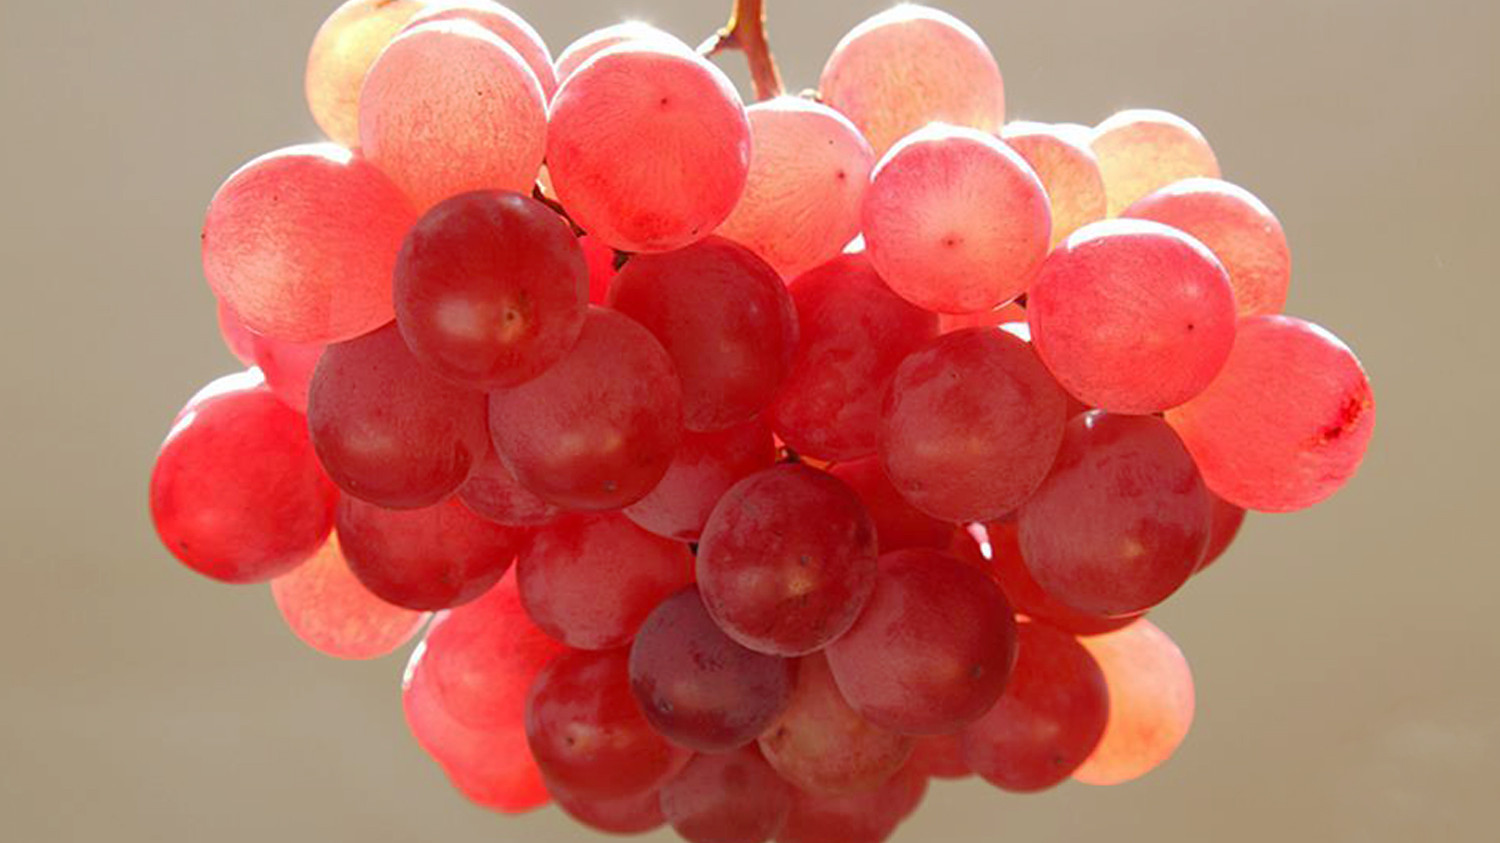 Out of 2000 grape varieties 500 are from Georgia